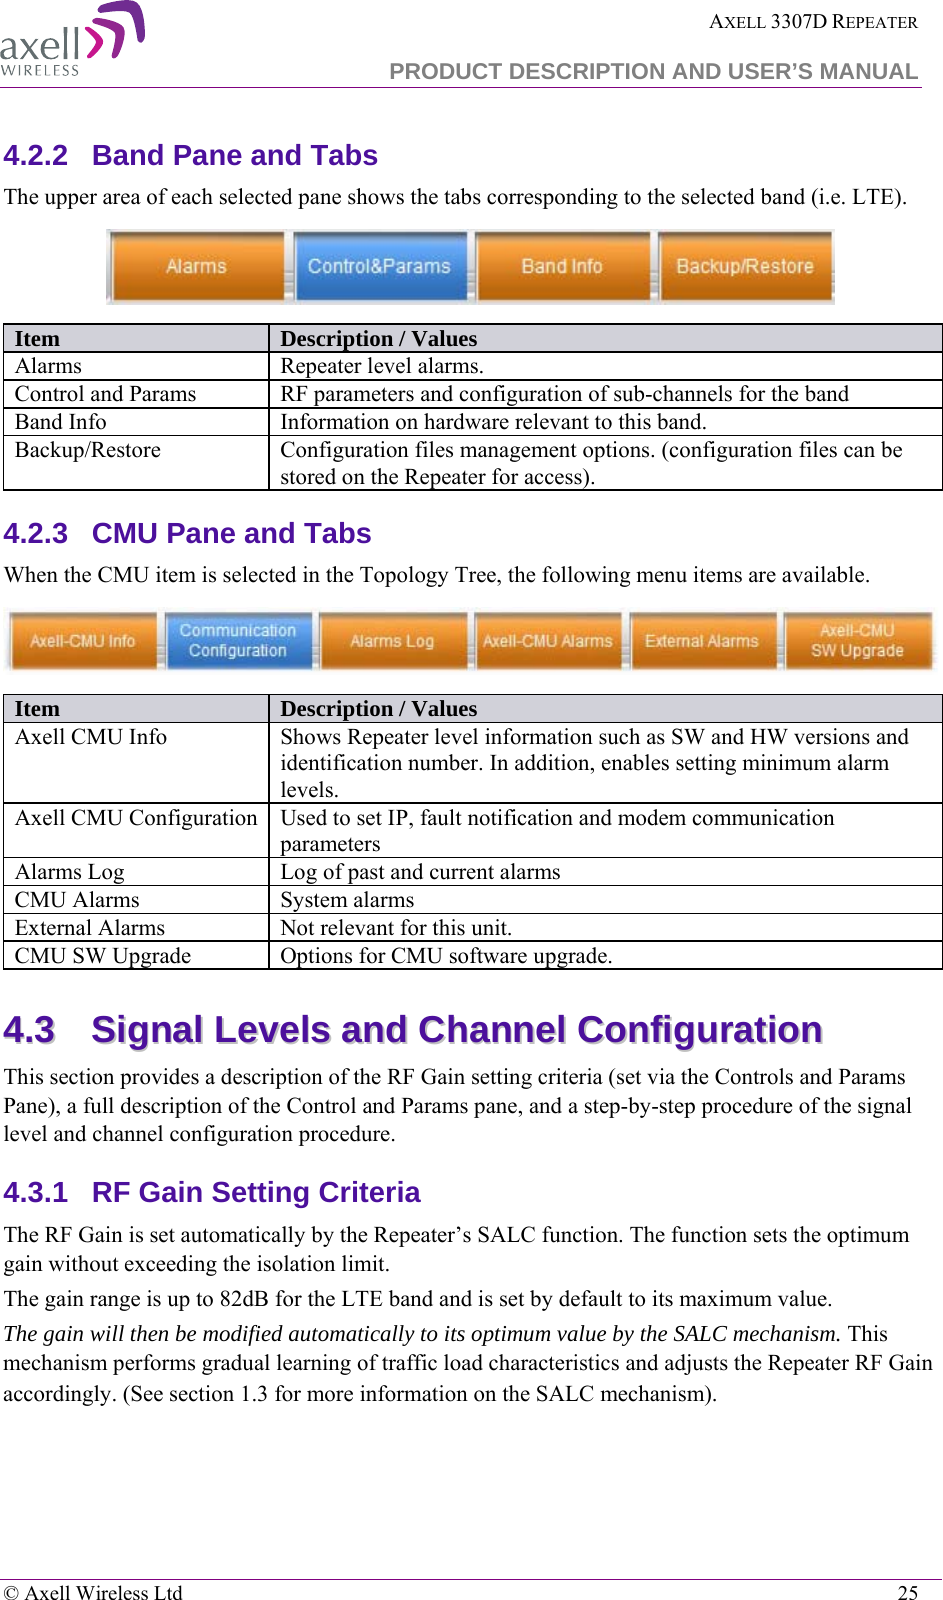  AXELL 3307D REPEATER  PRODUCT DESCRIPTION AND USER’S MANUAL   © Axell Wireless Ltd    25 4.2.2  Band Pane and Tabs  The upper area of each selected pane shows the tabs corresponding to the selected band (i.e. LTE).   Item Description / Values Alarms Repeater level alarms.  Control and Params  RF parameters and configuration of sub-channels for the band Band Info Information on hardware relevant to this band.  Backup/Restore Configuration files management options. (configuration files can be stored on the Repeater for access). 4.2.3  CMU Pane and Tabs When the CMU item is selected in the Topology Tree, the following menu items are available.   Item Description / Values Axell CMU Info Shows Repeater level information such as SW and HW versions and identification number. In addition, enables setting minimum alarm levels. Axell CMU Configuration Used to set IP, fault notification and modem communication parameters Alarms Log Log of past and current alarms CMU Alarms System alarms External Alarms Not relevant for this unit. CMU SW Upgrade Options for CMU software upgrade. 44..33  SSiiggnnaall  LLeevveellss  aanndd  CChhaannnneell  CCoonnffiigguurraattiioonn  This section provides a description of the RF Gain setting criteria (set via the Controls and Params Pane), a full description of the Control and Params pane, and a step-by-step procedure of the signal level and channel configuration procedure. 4.3.1  RF Gain Setting Criteria The RF Gain is set automatically by the Repeater’s SALC function. The function sets the optimum gain without exceeding the isolation limit.  The gain range is up to 82dB for the LTE band and is set by default to its maximum value.  The gain will then be modified automatically to its optimum value by the SALC mechanism. This mechanism performs gradual learning of traffic load characteristics and adjusts the Repeater RF Gain accordingly. (See section  1.3 for more information on the SALC mechanism). 